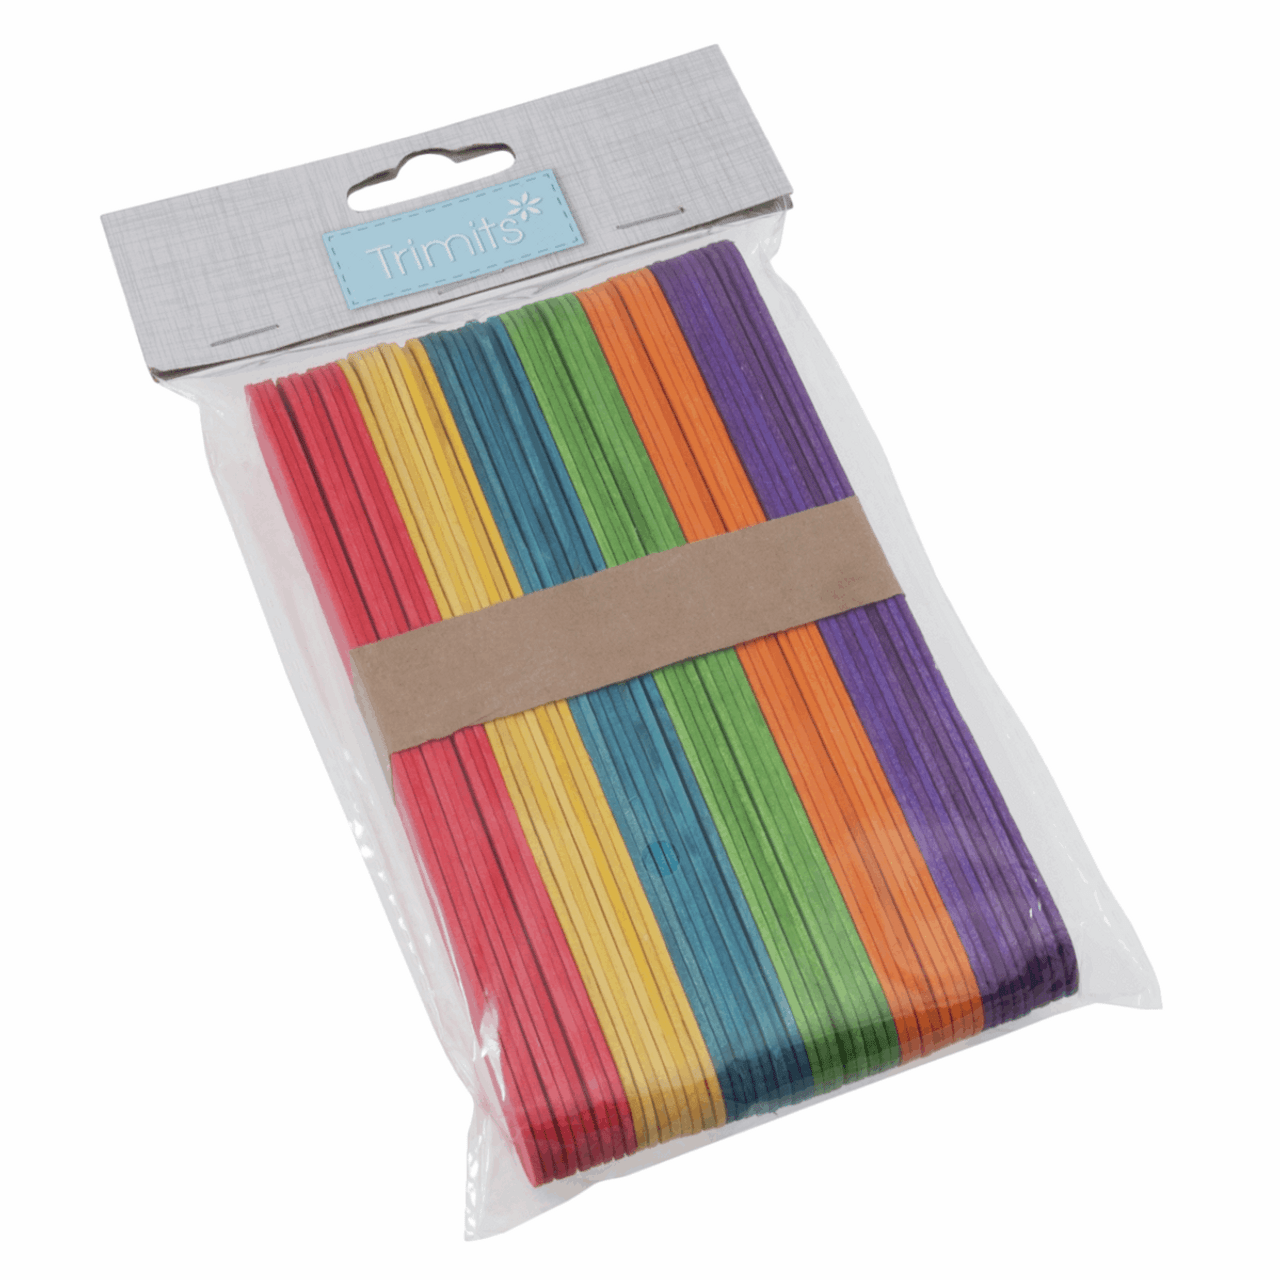 Lollypop Sticks - Wooden Large (150 x 18 x 1.6mm) Multi Coloured  Pack of 50